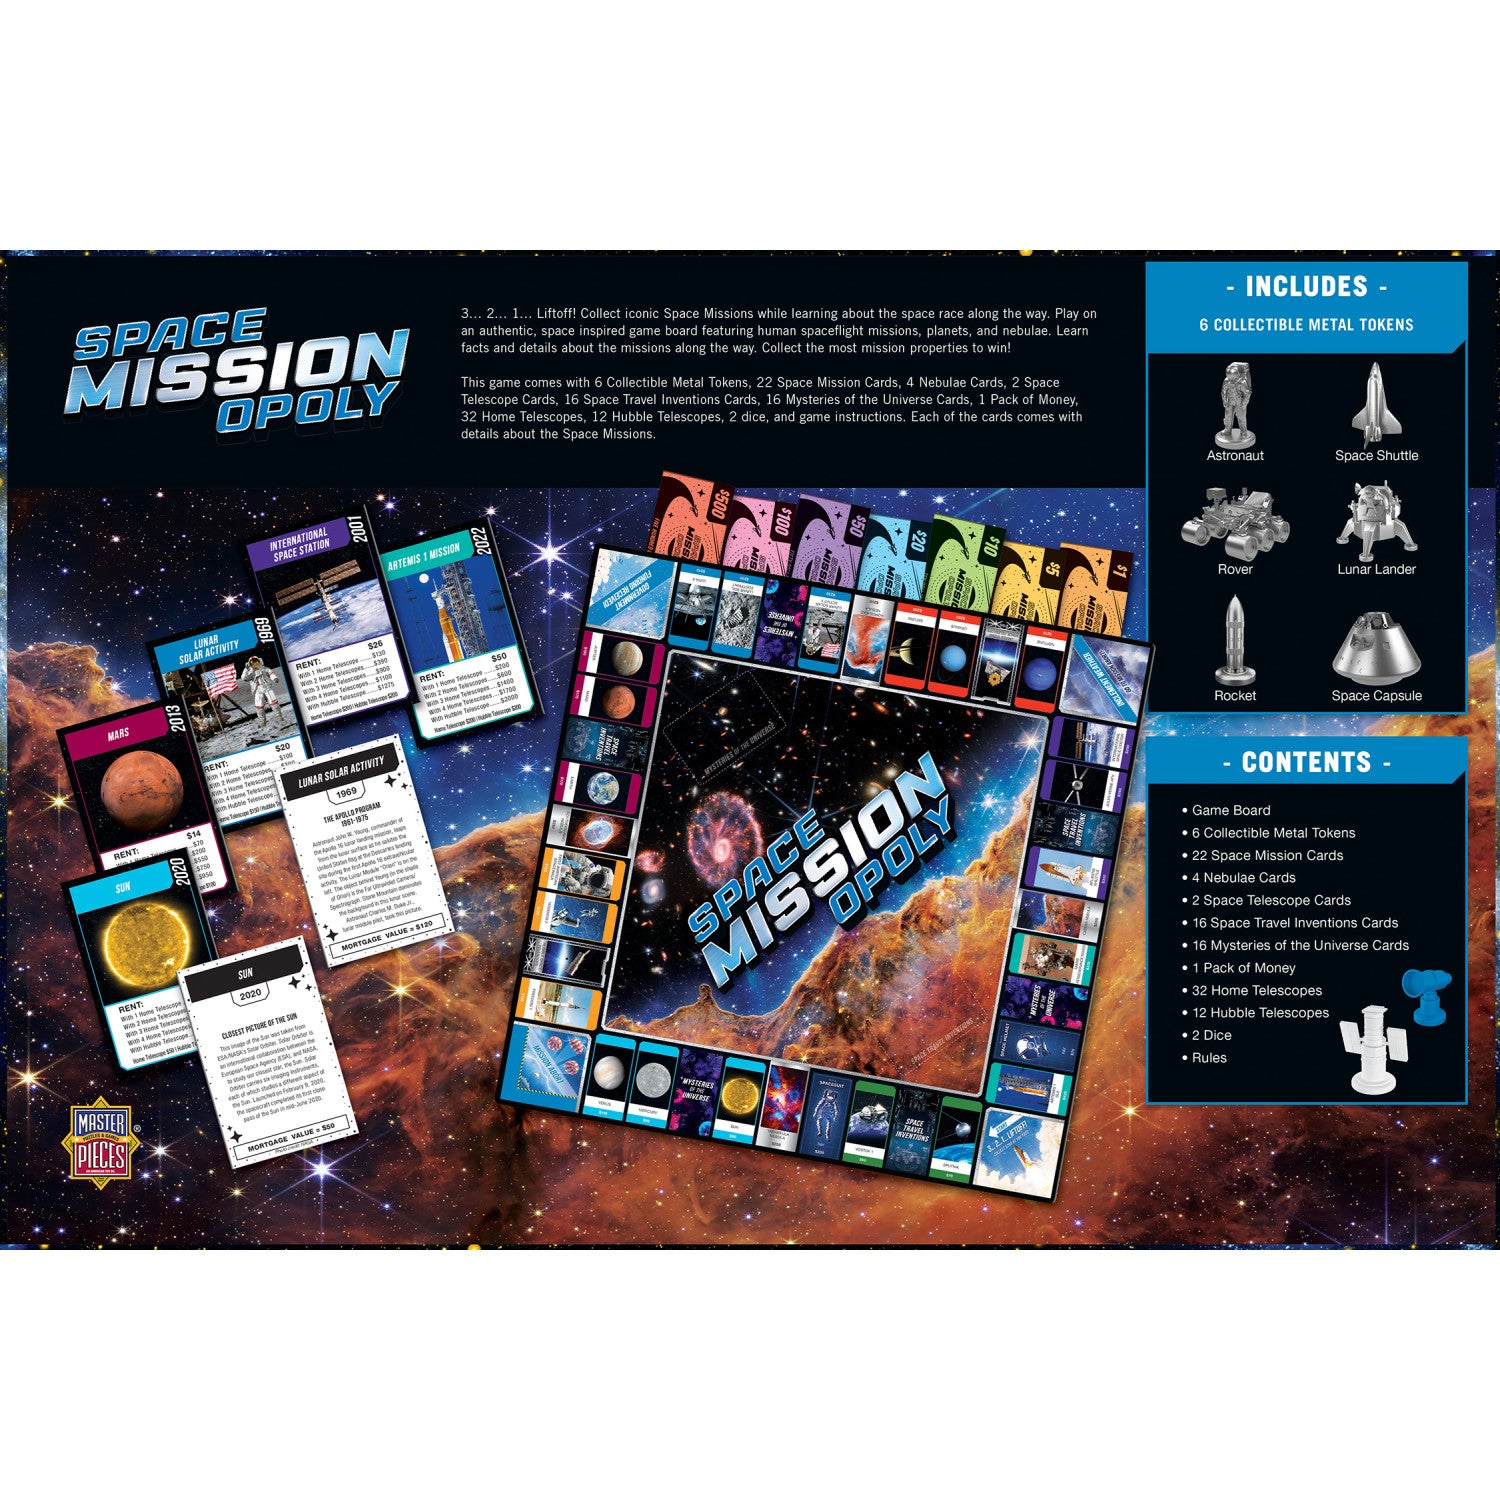 Space Mission Opoly Board Game